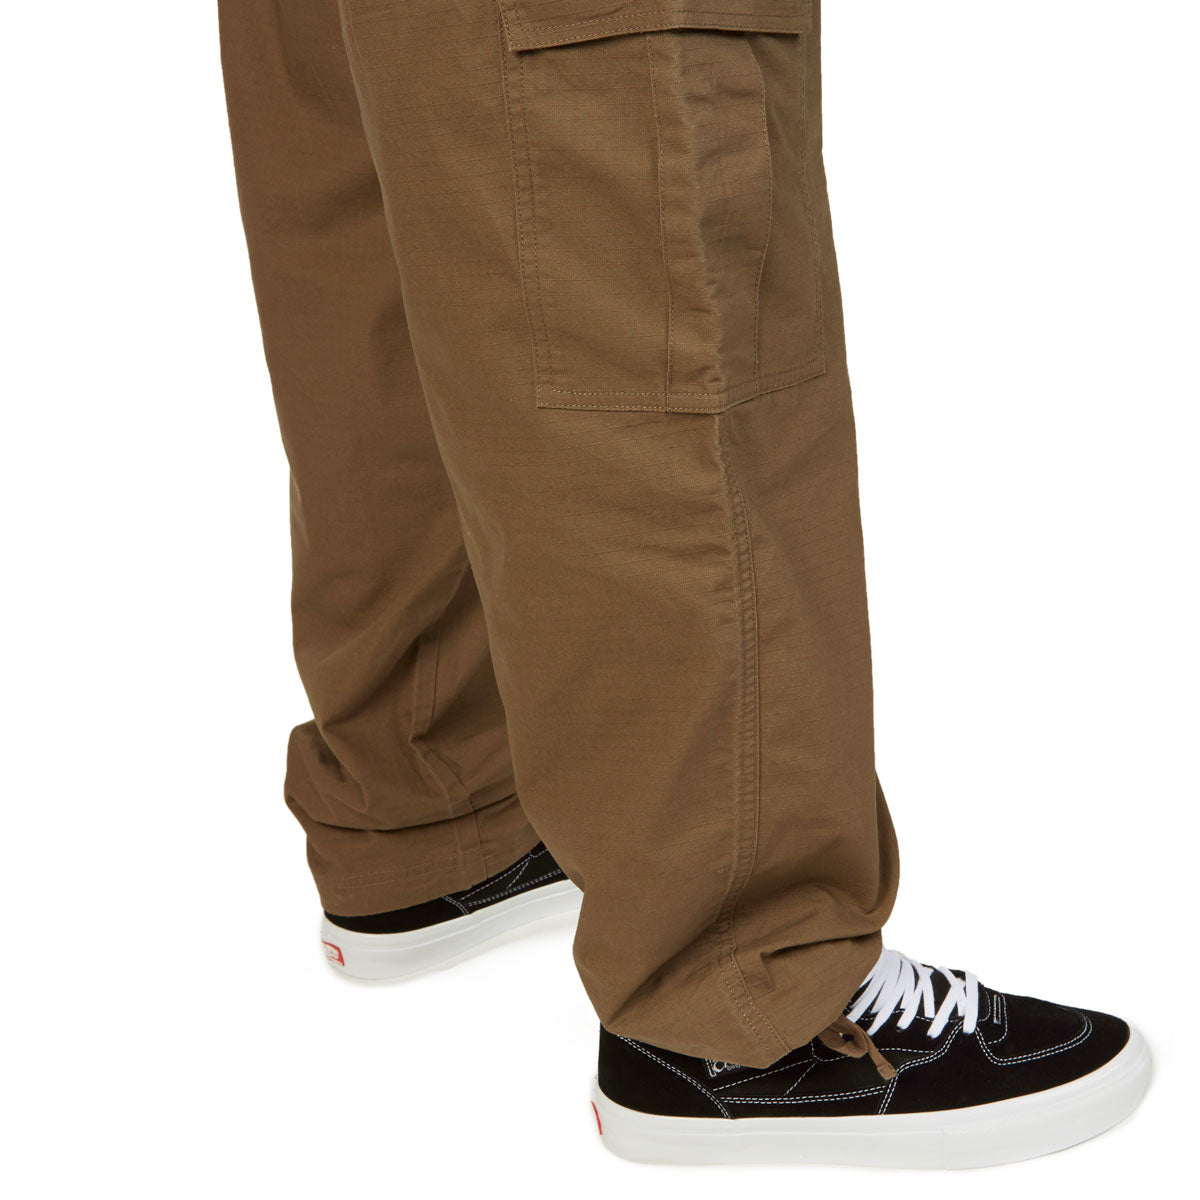 CCS Easy Ripstop Cargo Pants - Brown image 5